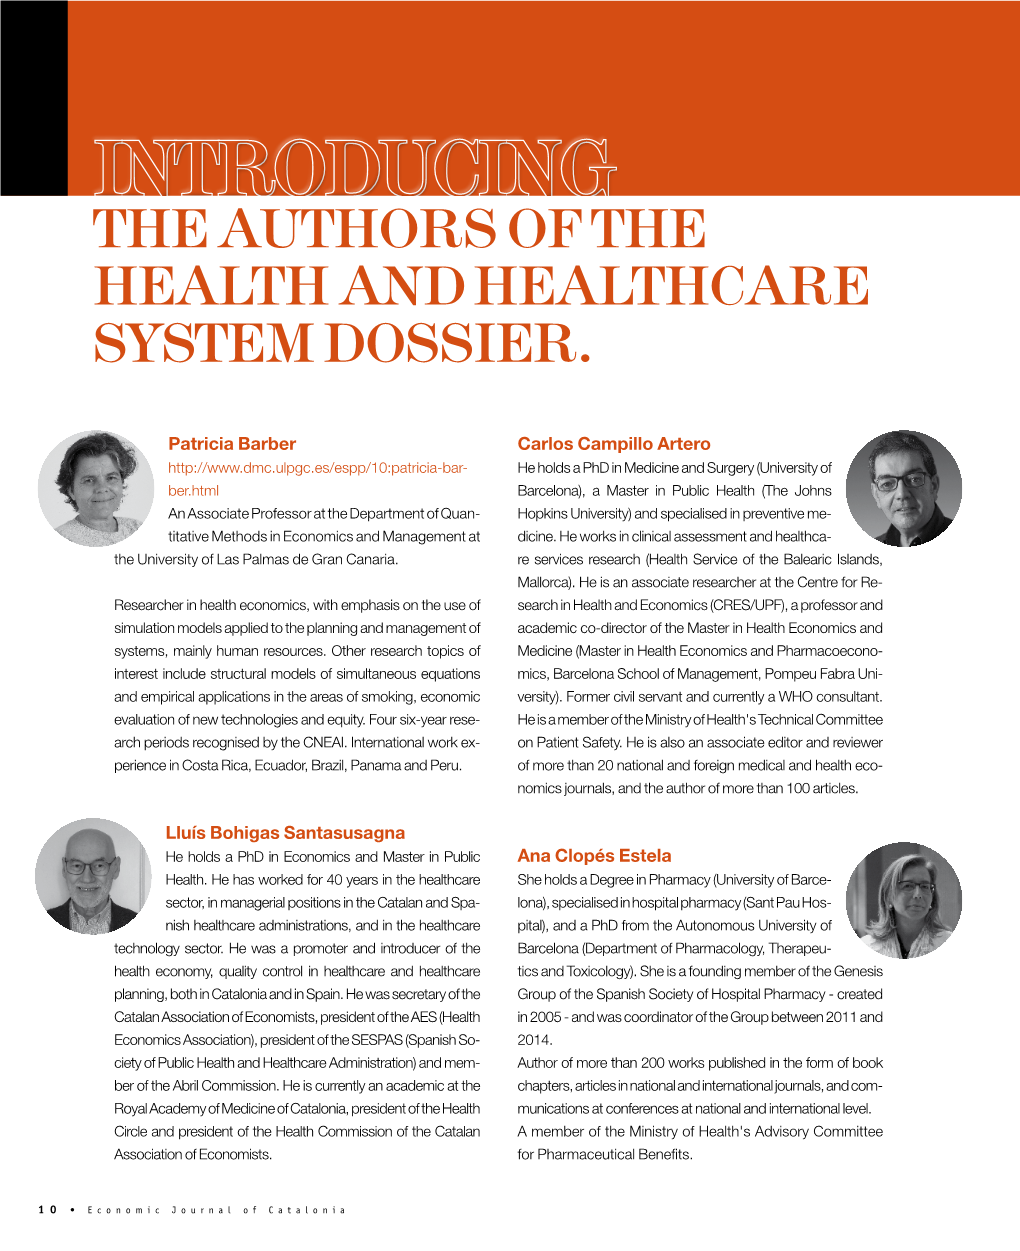 Introducing the Authors of the Health and Healthcare System Dossier